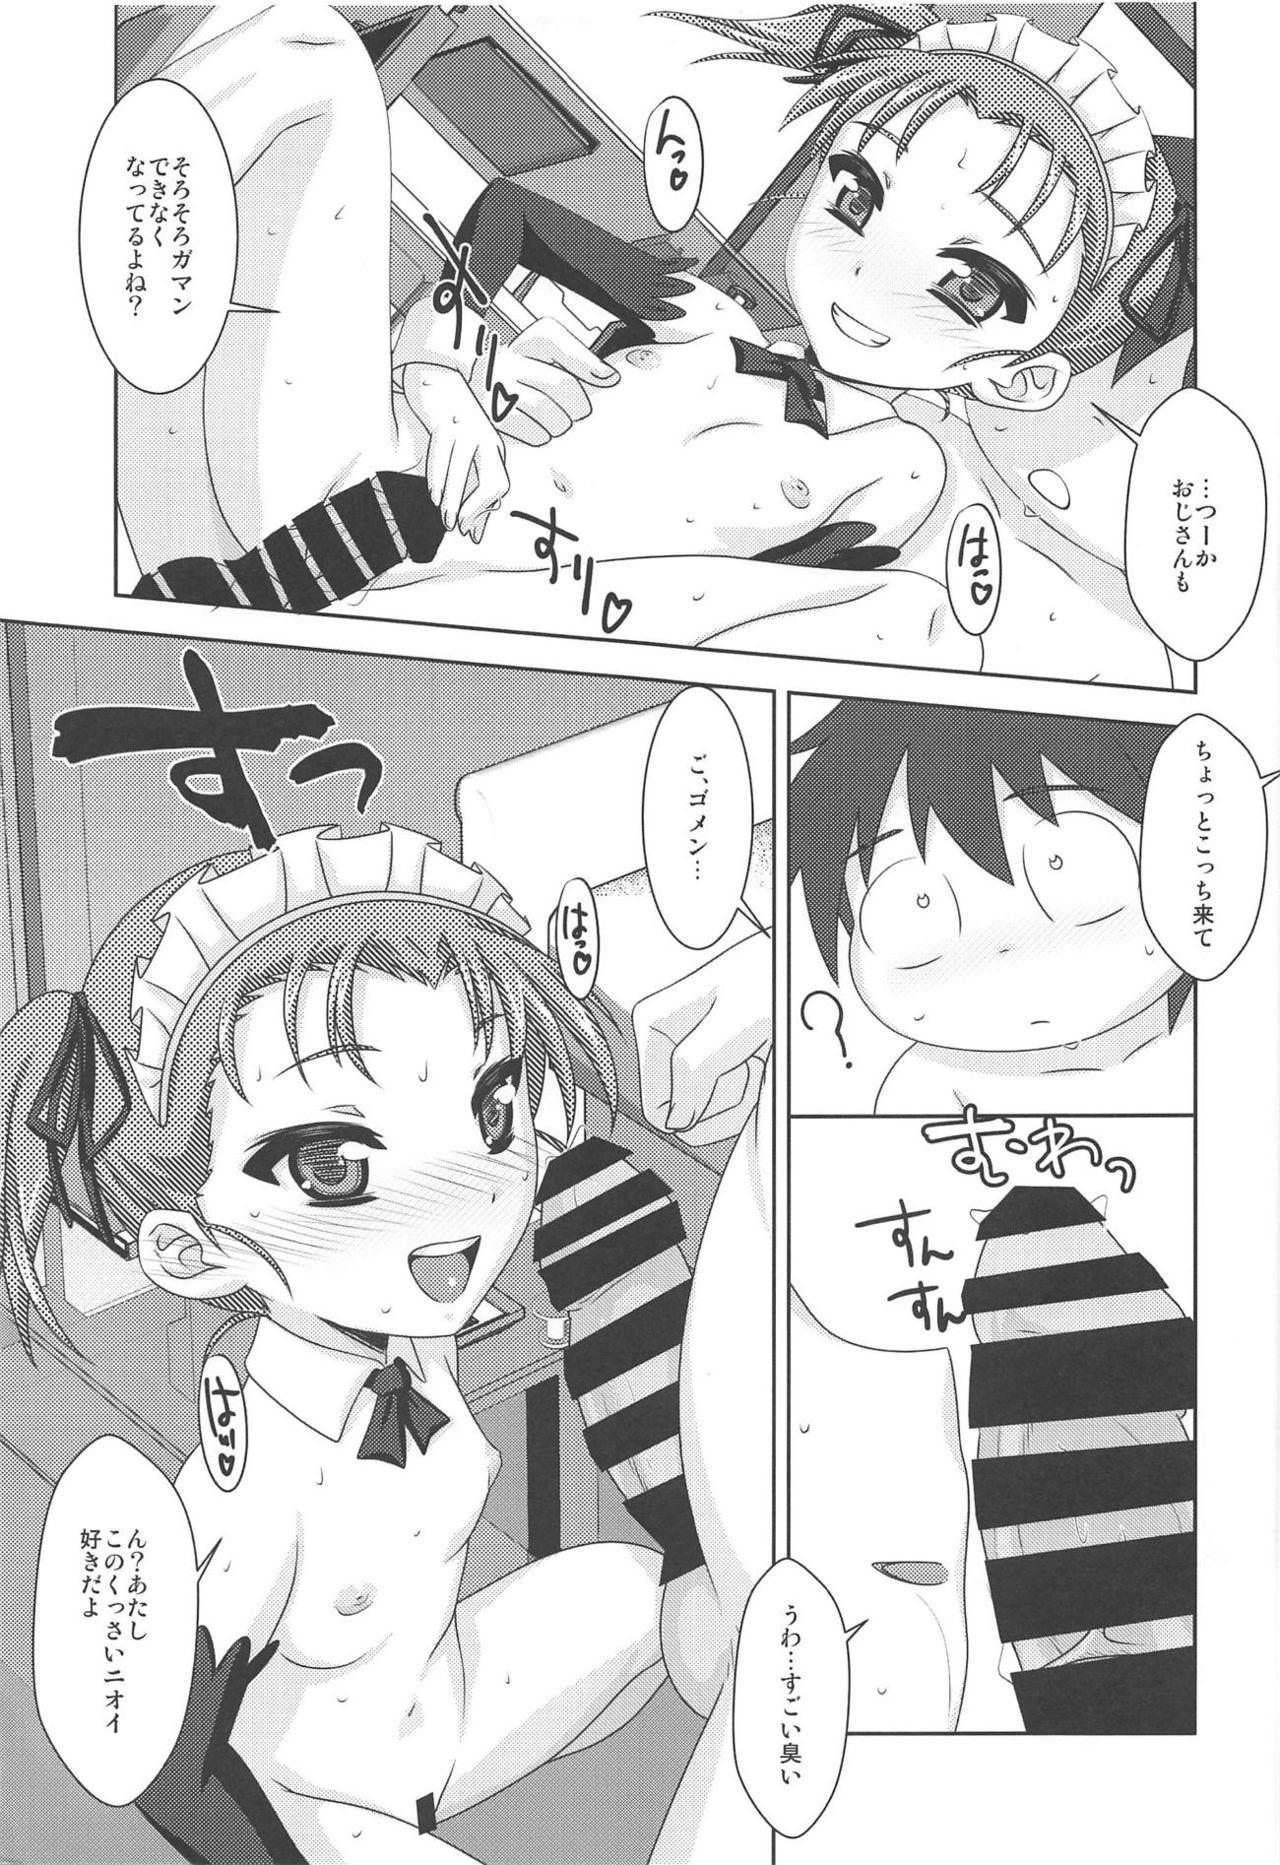 Bwc Houkago Link 11 - Accel world Facial - Page 10